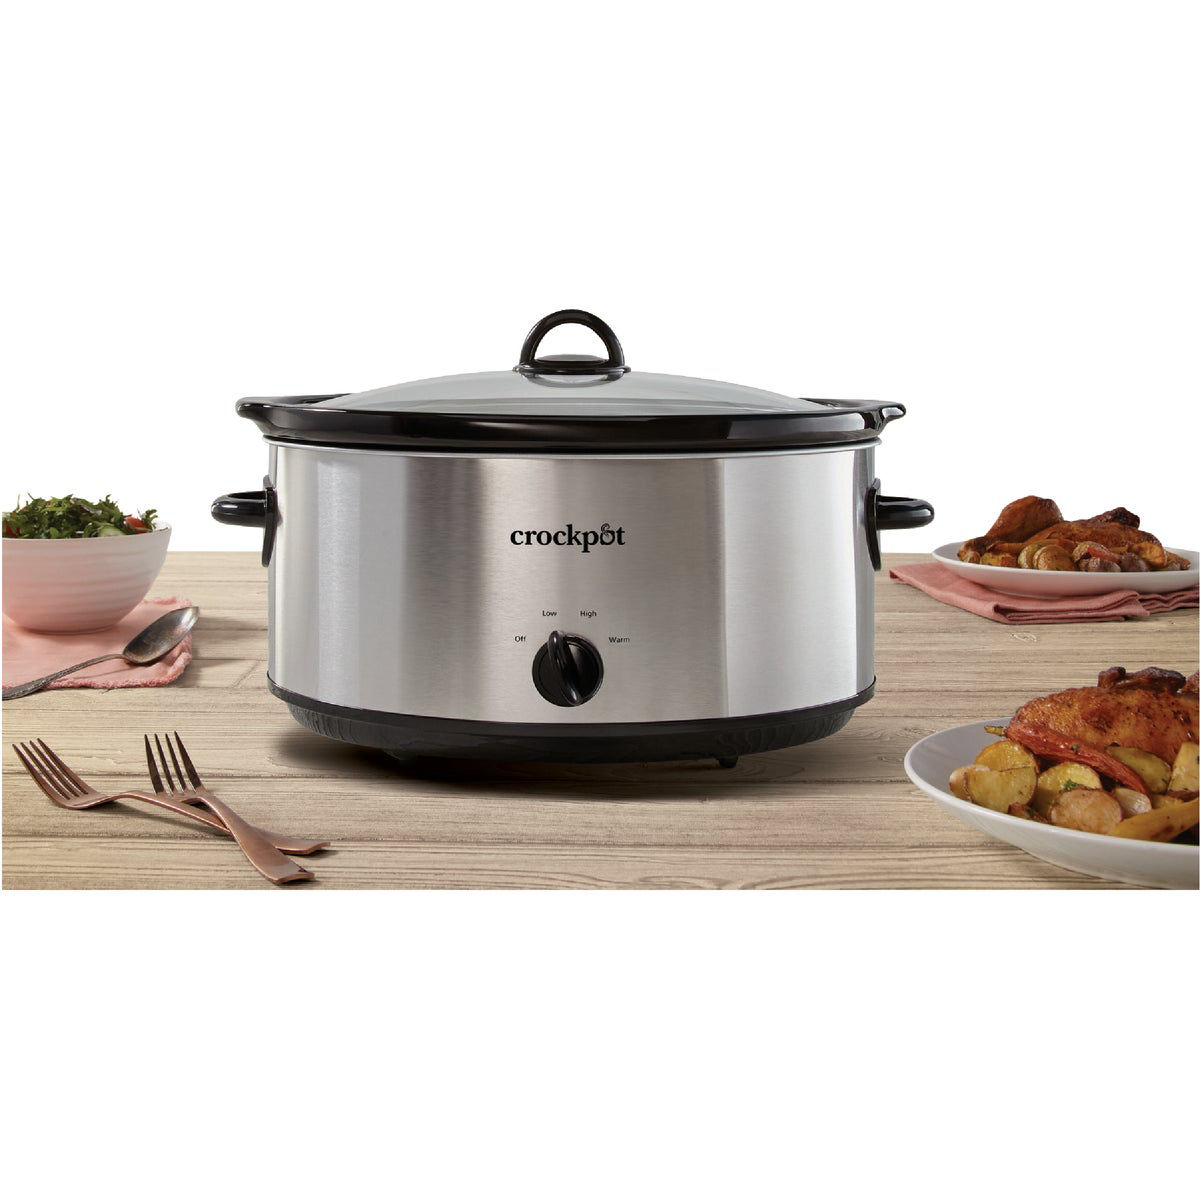 Crockpot 8 Qt. Stainless Steel Slow Cooker